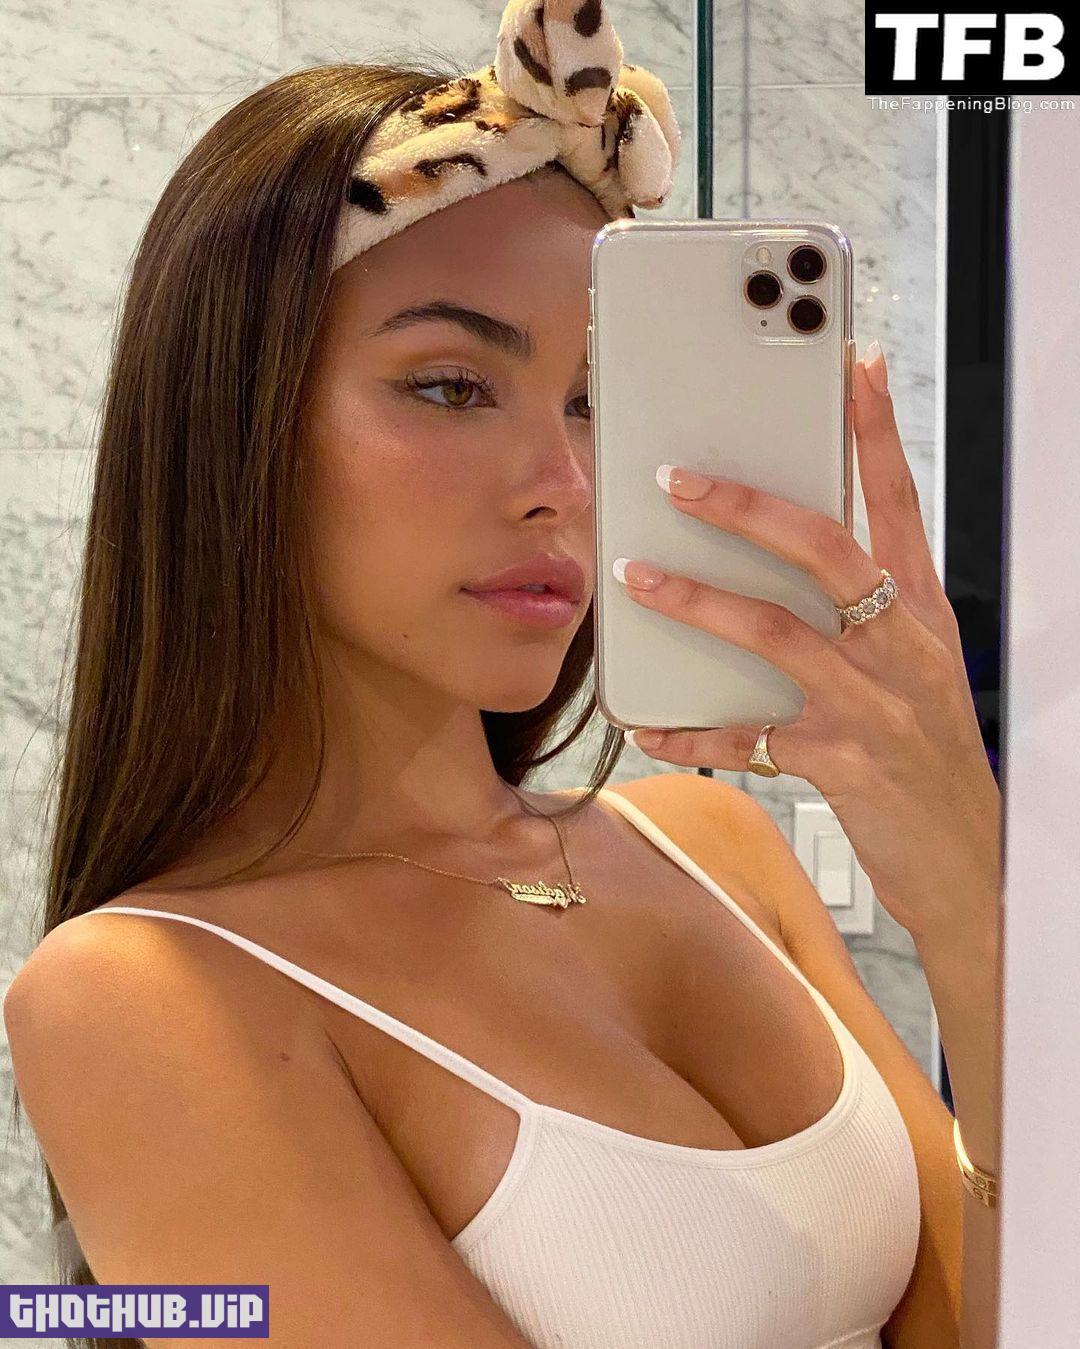 Madison Beer Beautiful Cleavage 2 thefappeningblog.com